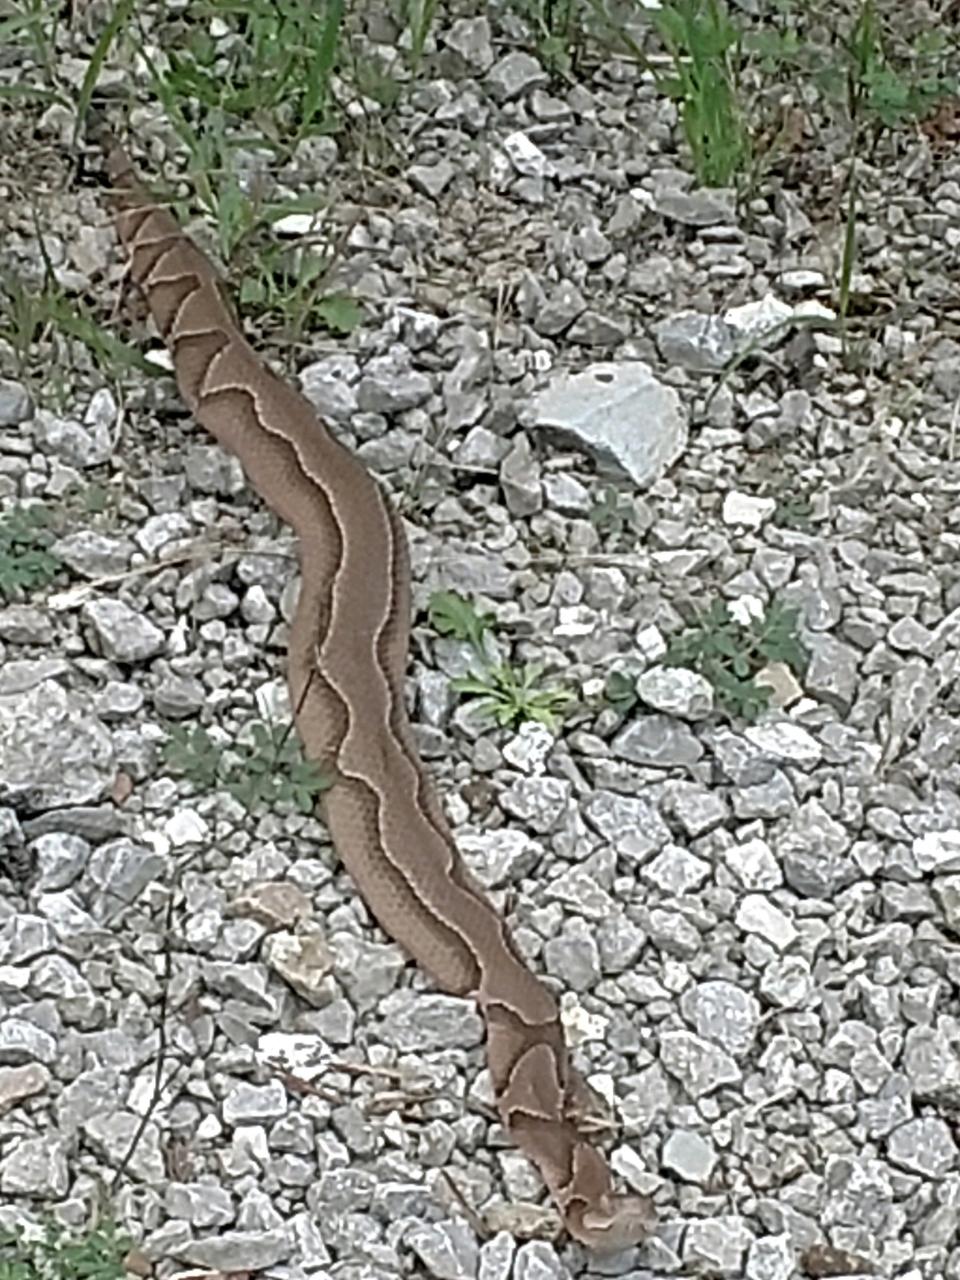 Christy Dablemont of Bolivar, Mo., photographed this unusually marked copperhead snake on the Frisco Highline Trail north of Springfield.